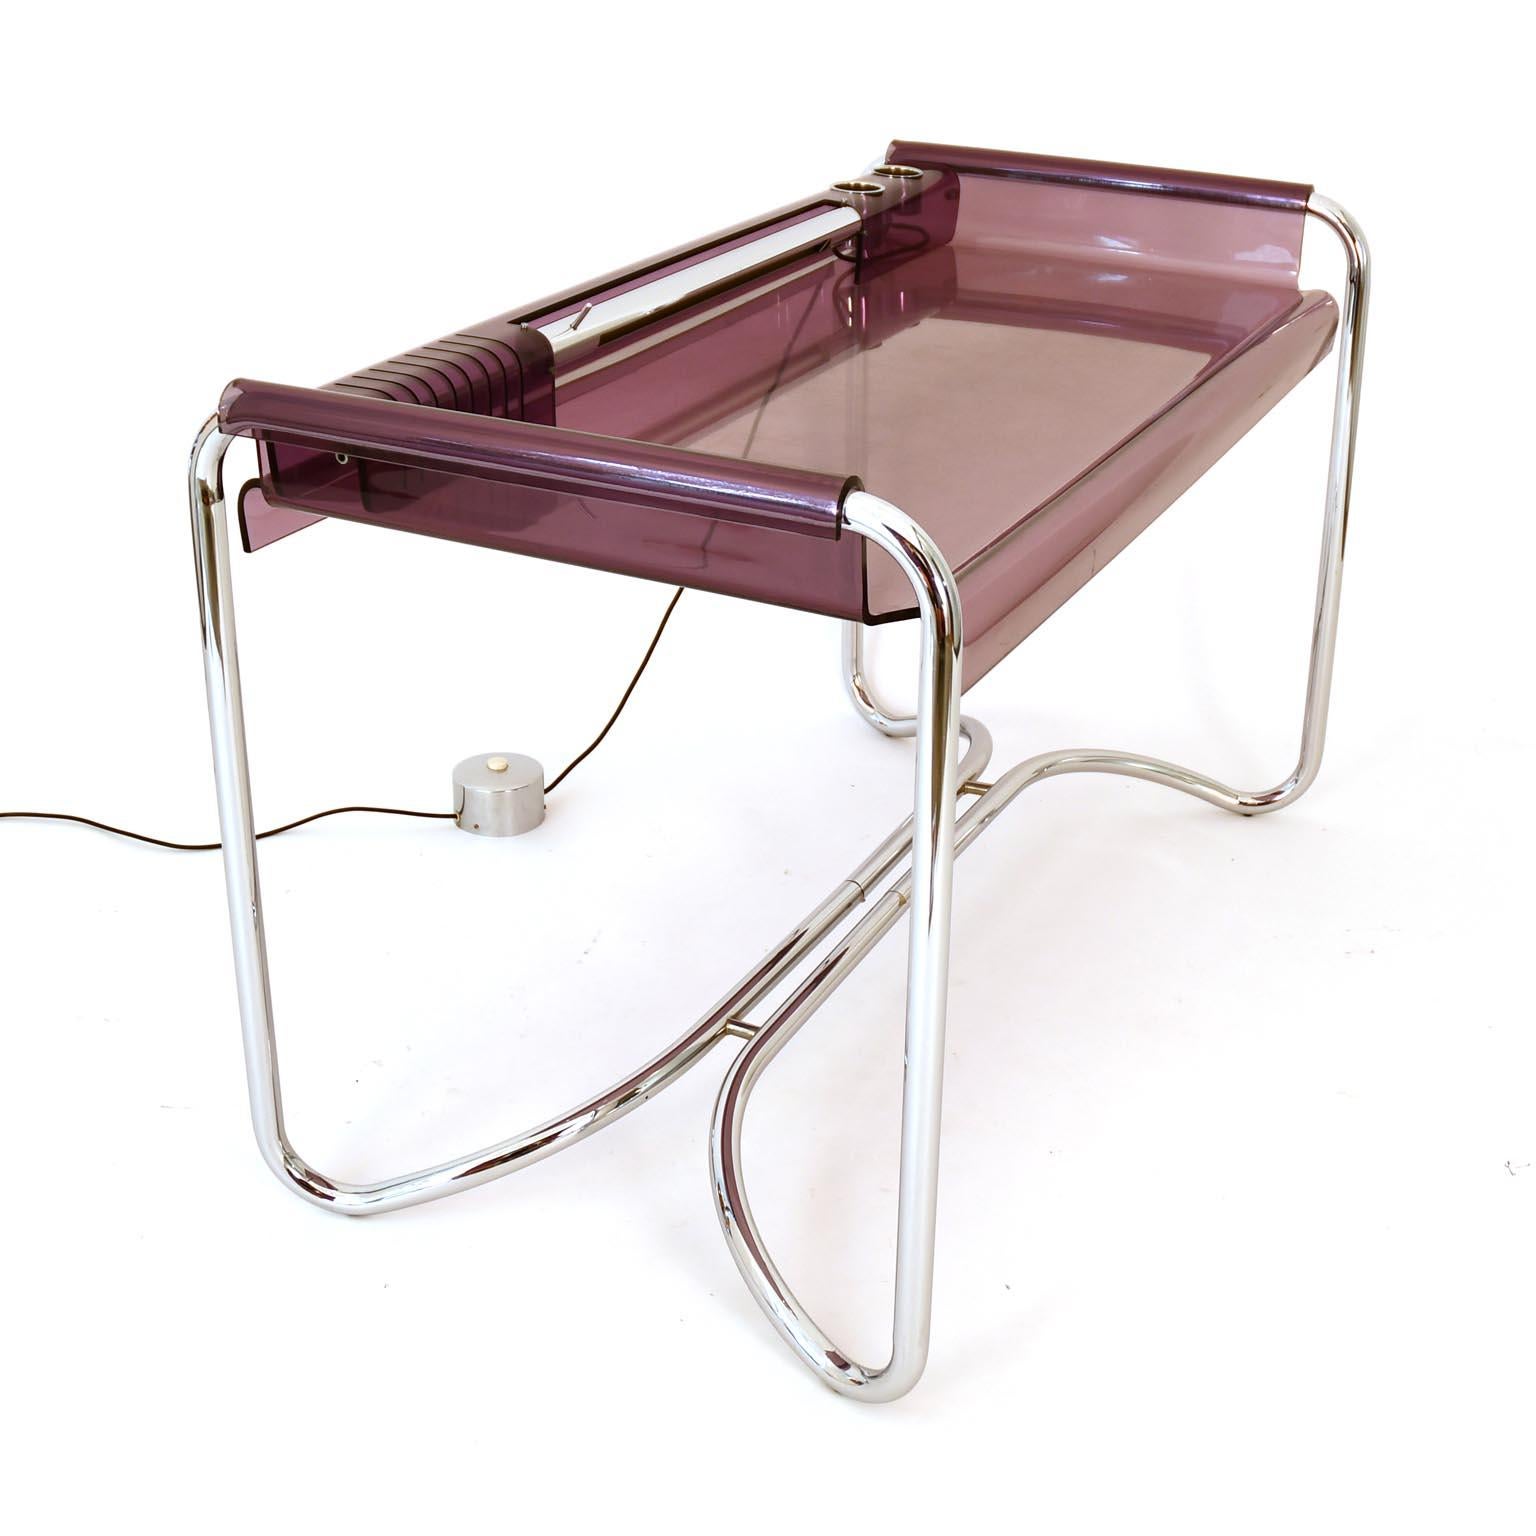 Plated Fabio Lenci Desk with Chair and Lamp by Formes Nouvelles, 1970s Italy Chrome